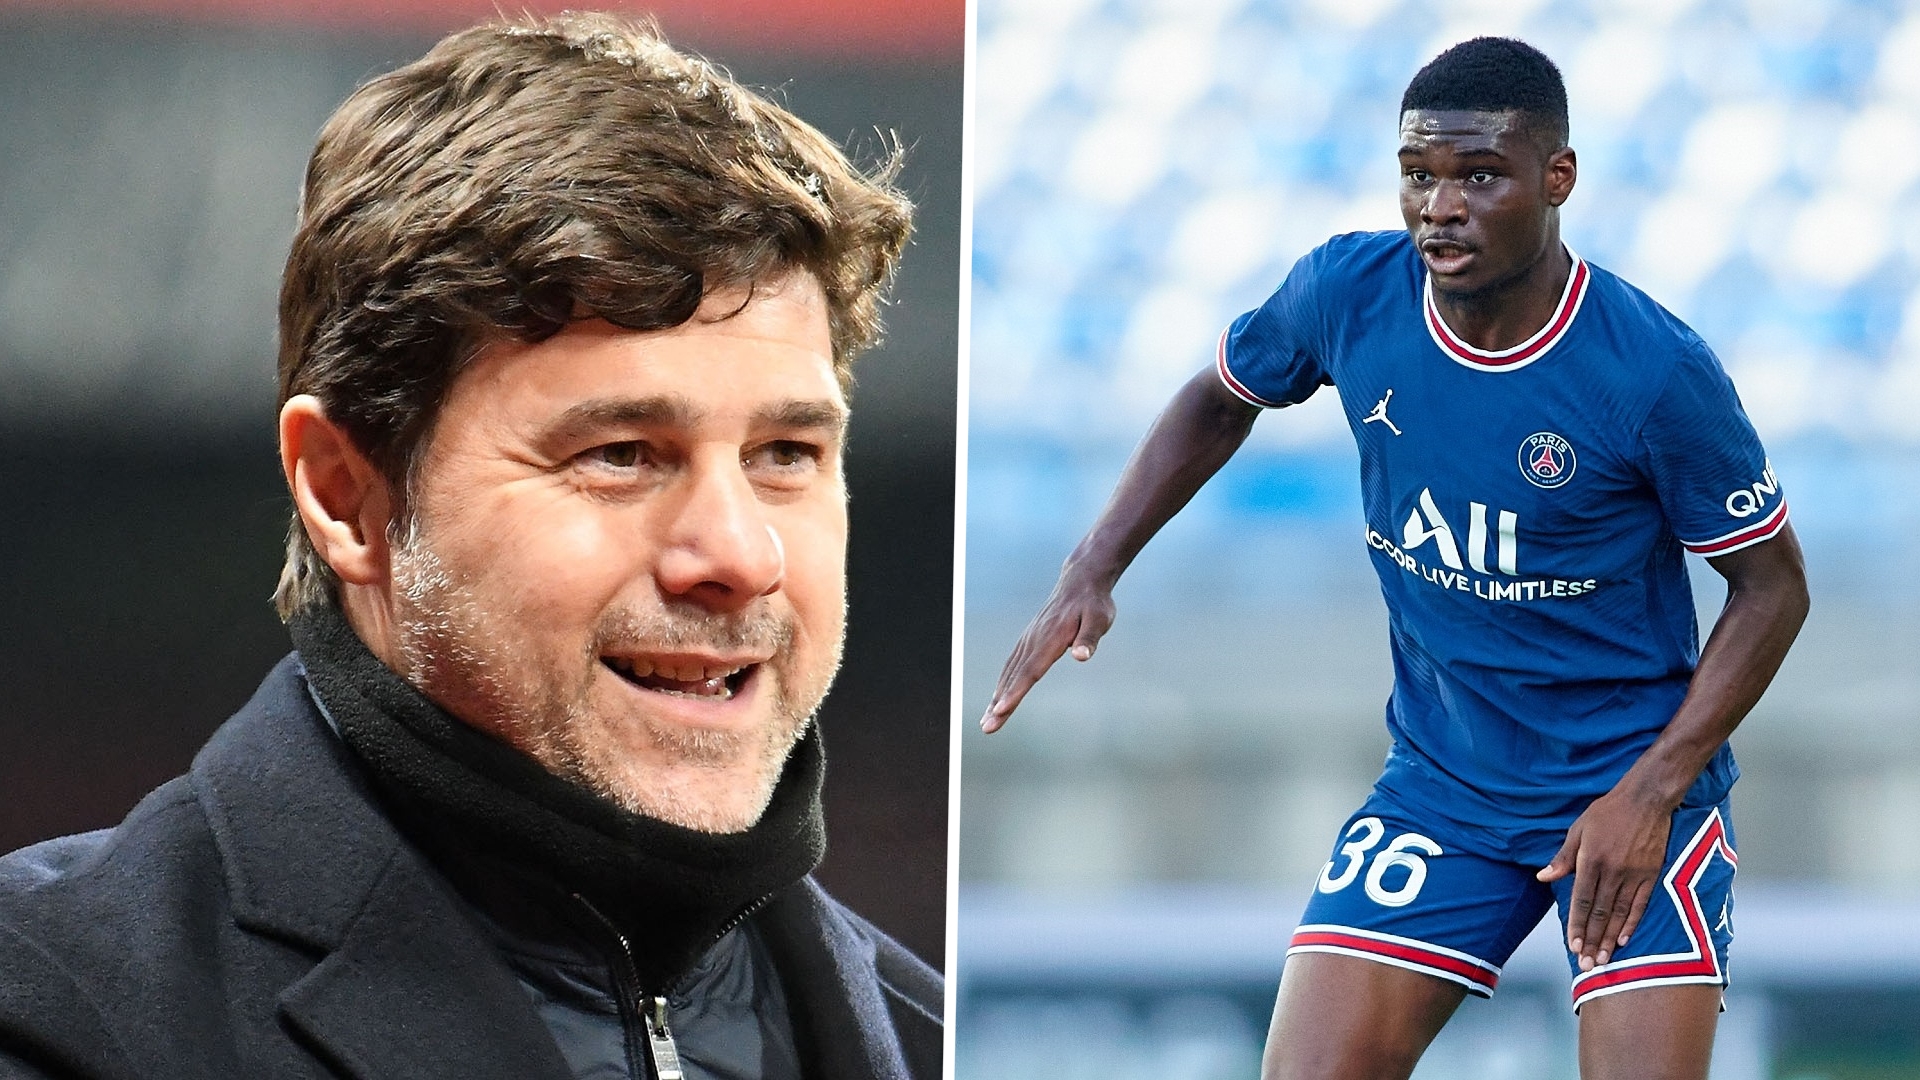 ‘The coach has shown confidence in me’ – Ebimbe hails Pochettino’s impact after PSG debut